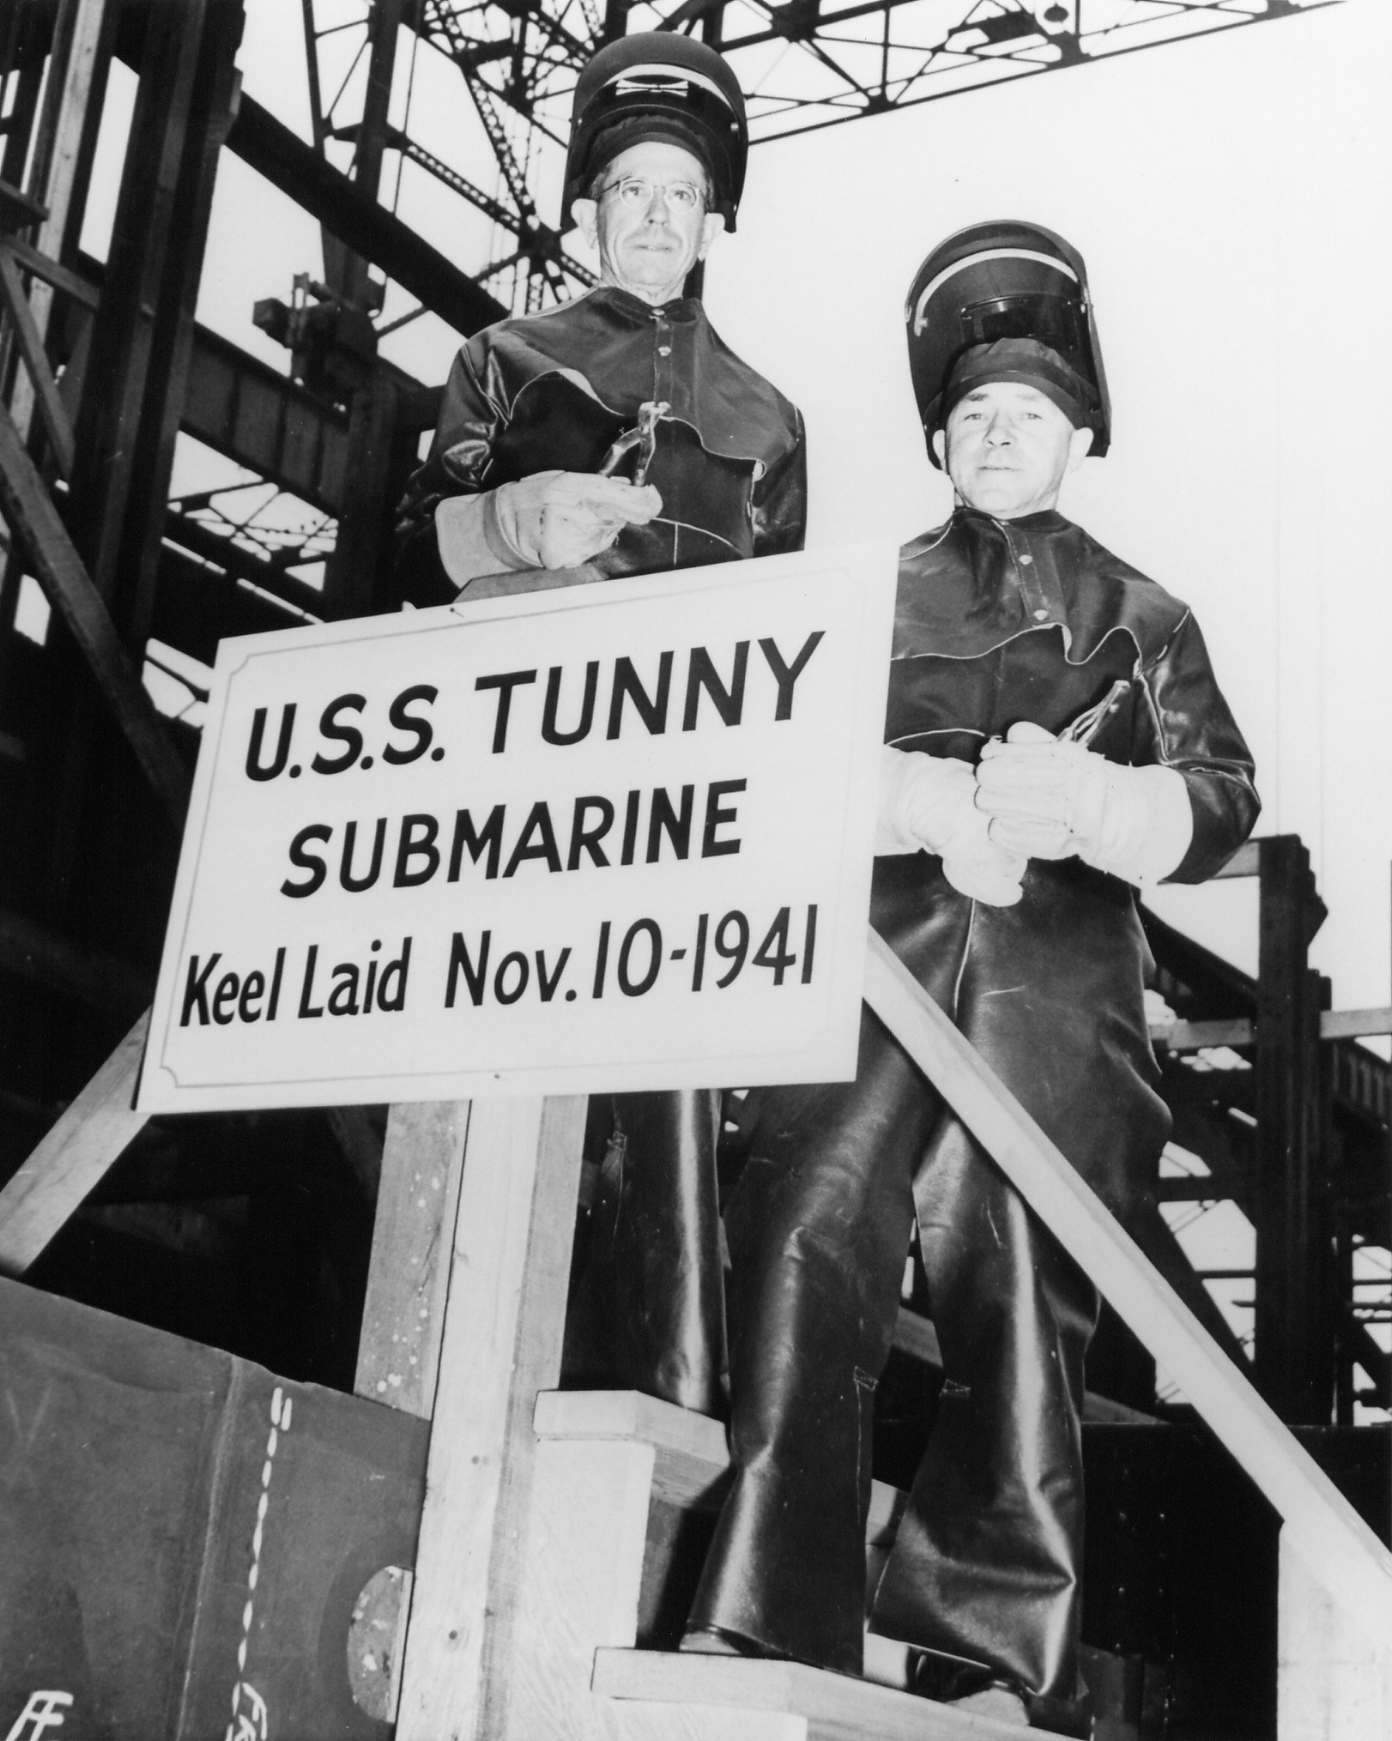 W. N. Simons and Robert F. Cooke, honorary keel layers of submarine Tunny, posing with the sign at Mare Island Naval Shipyard, California, United States, 10 Nov 1941